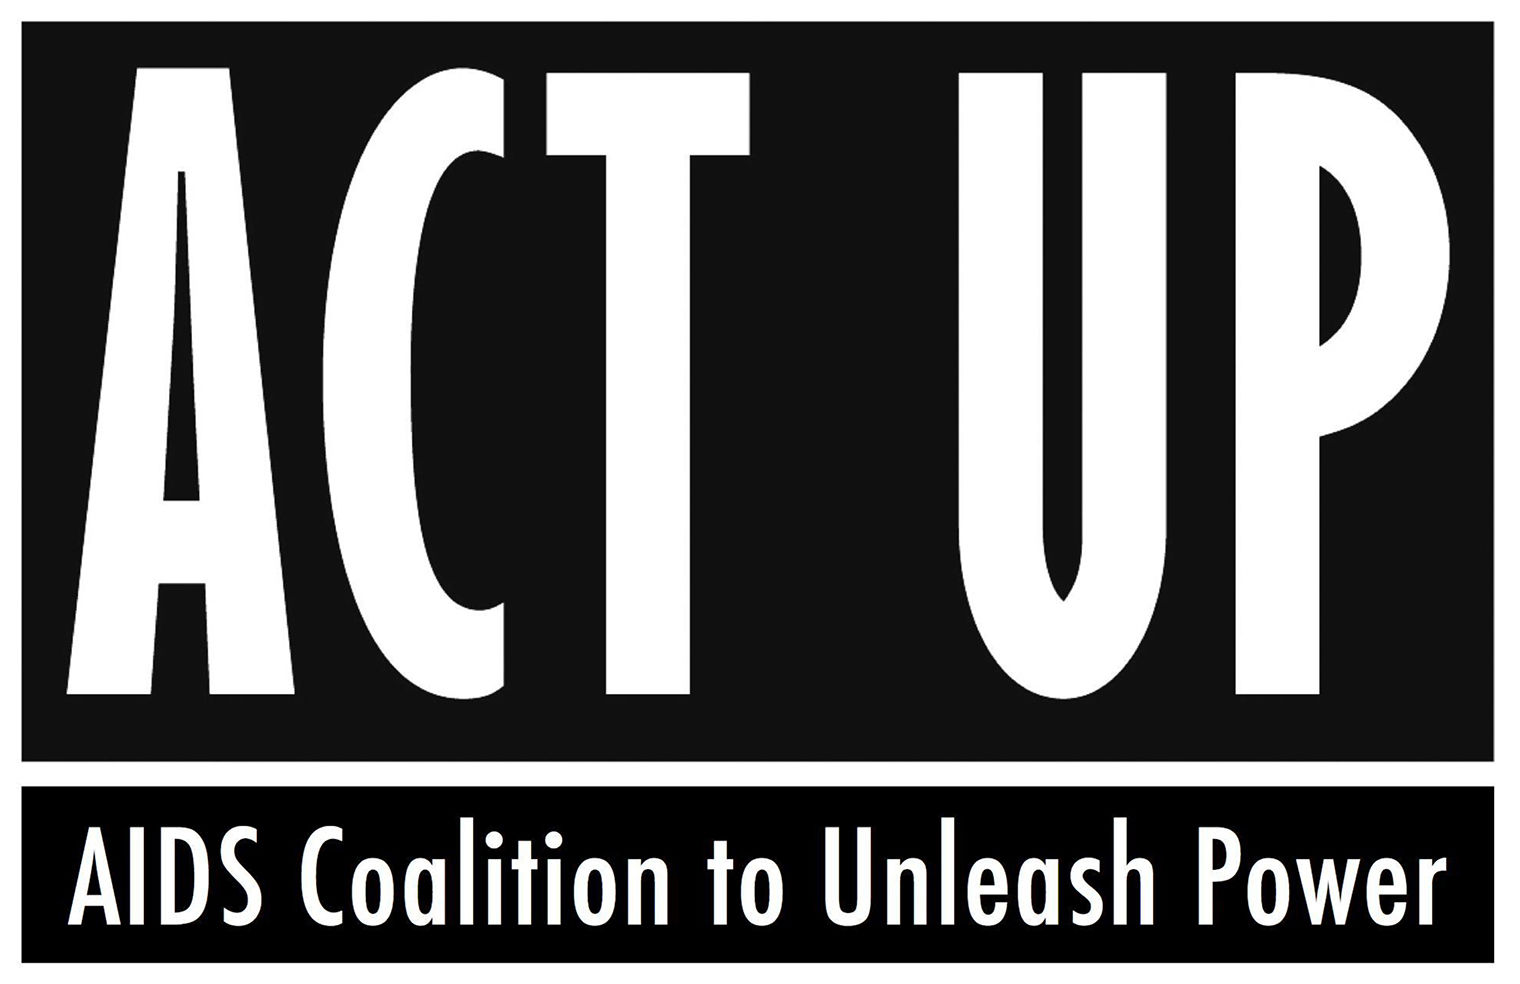 ACT UP logo with white text against a black background. "ACT UP" is in large caps, with text below that reads "AIDS Coalition to Unleash Power."